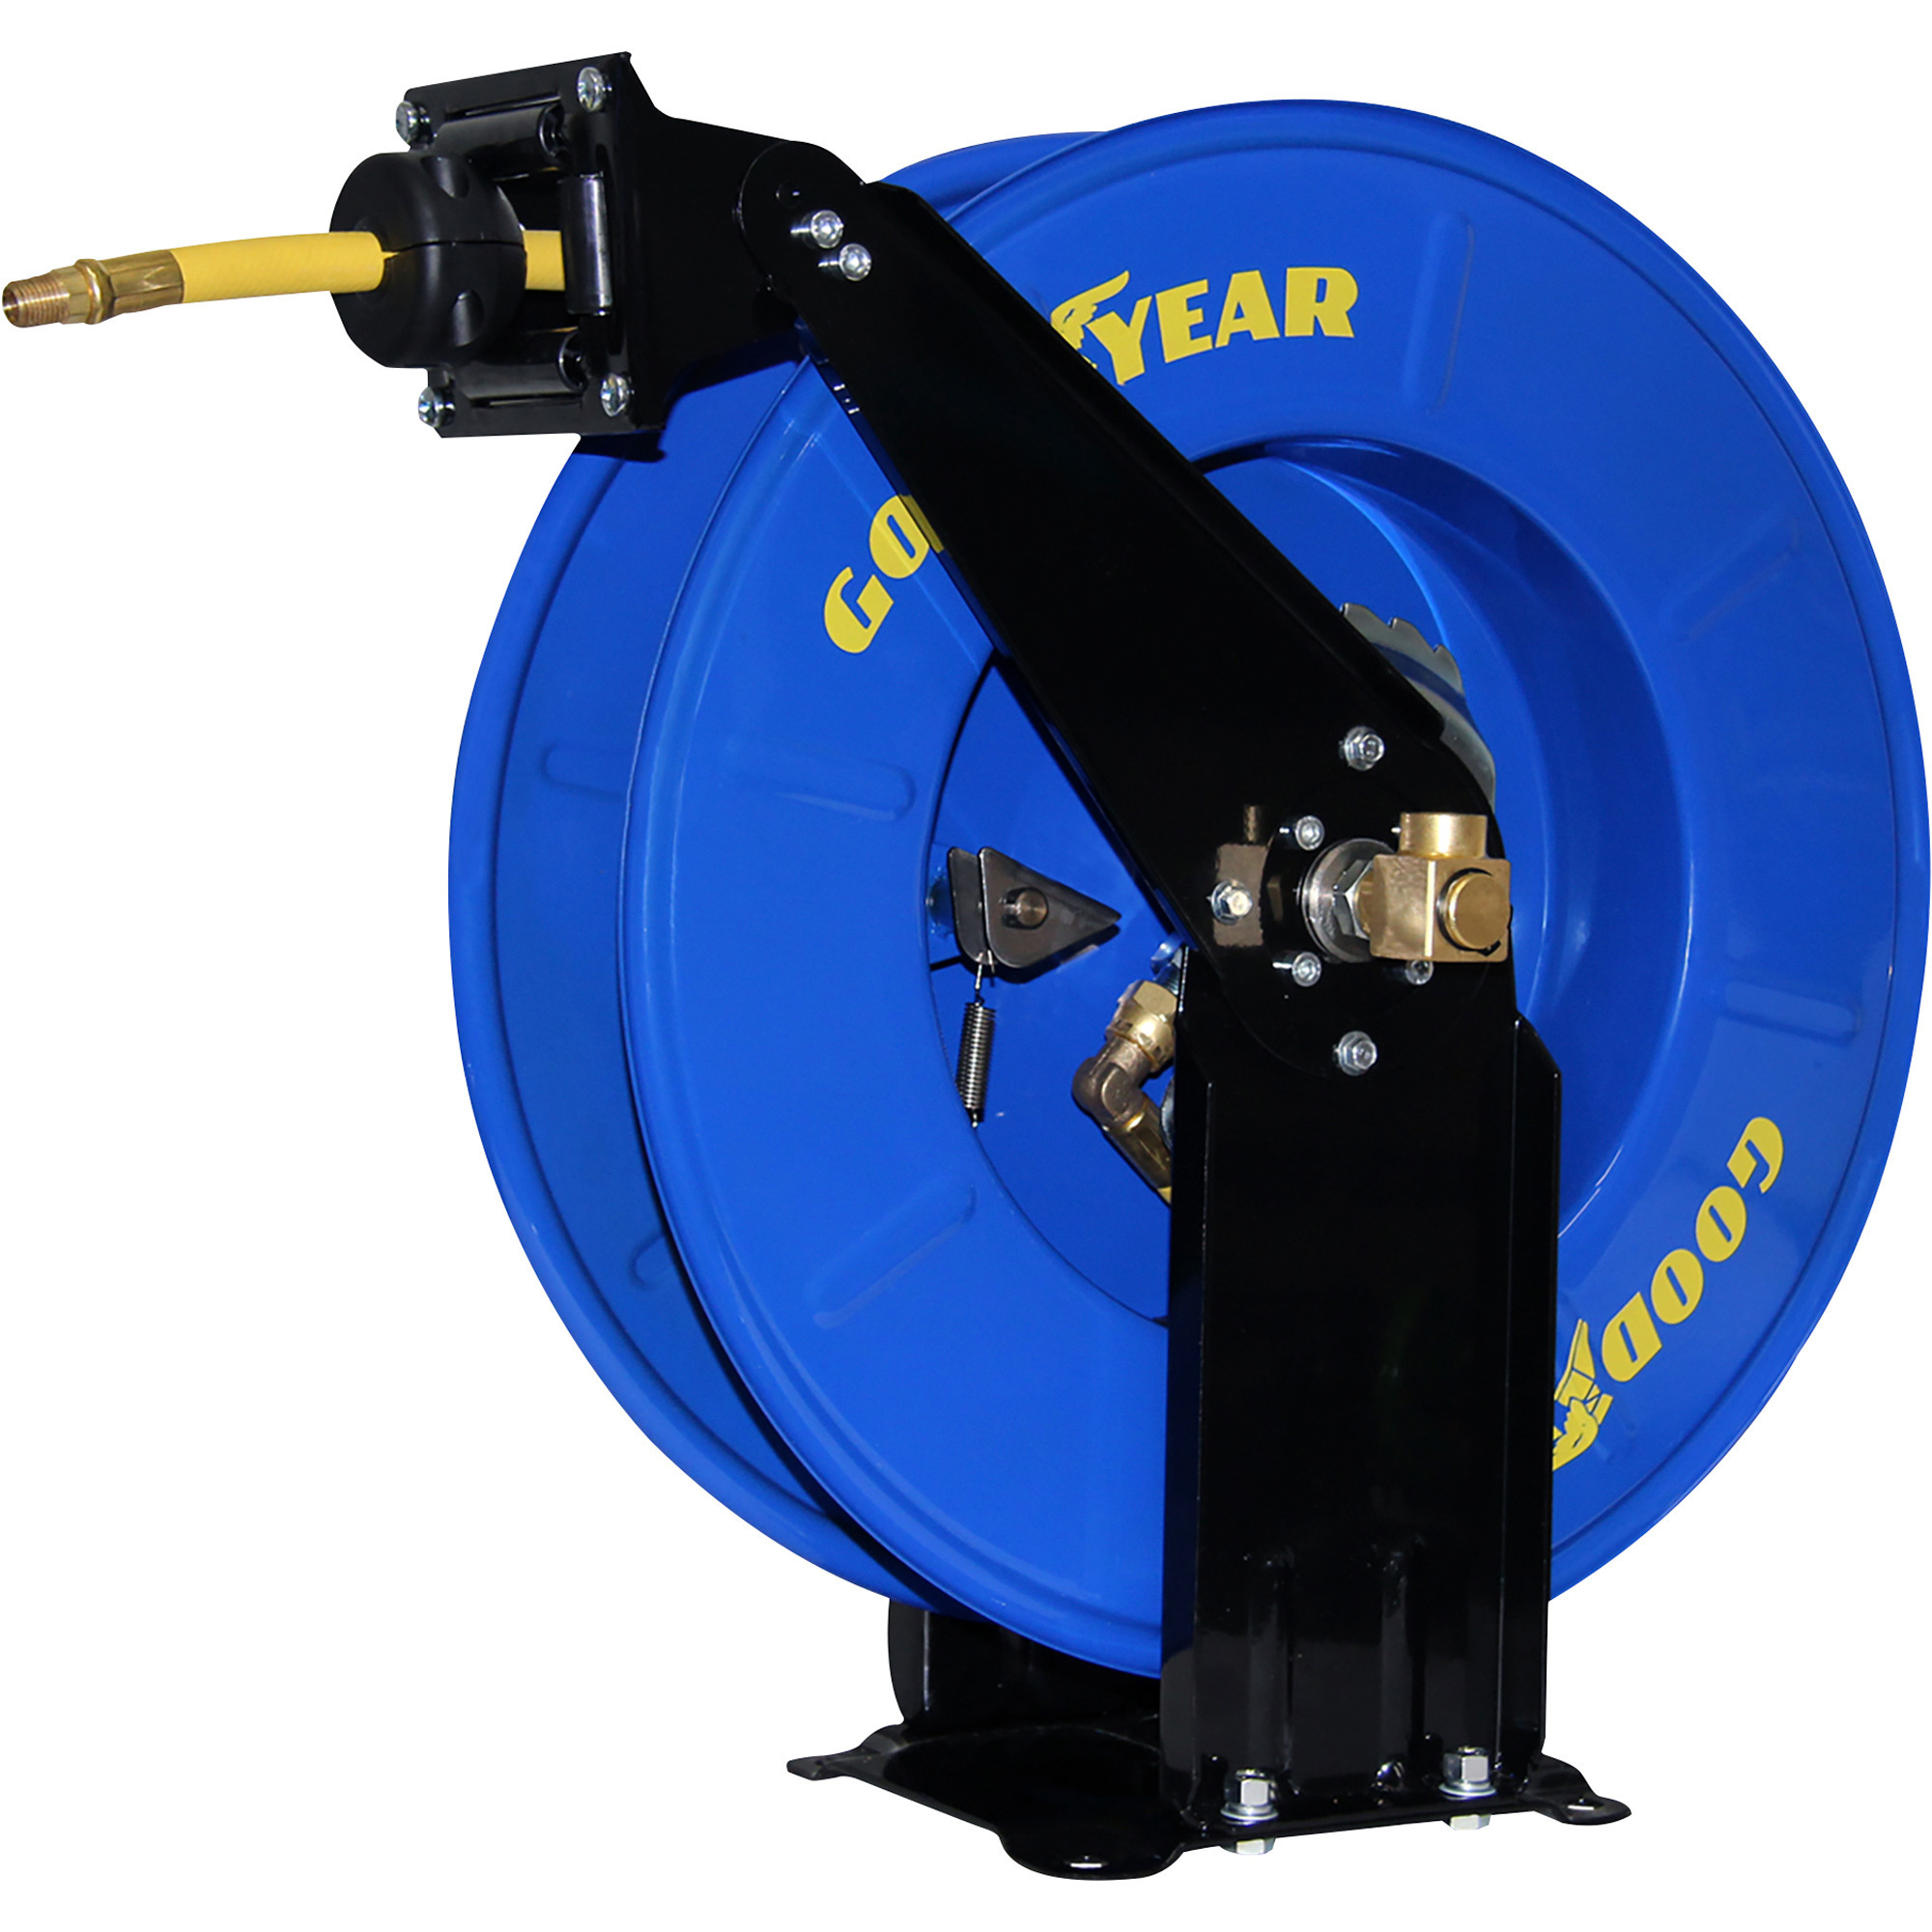 GOODYEAR Spring Driven Steel Retractable Hose Reel (1/4 in. x 50 ft.